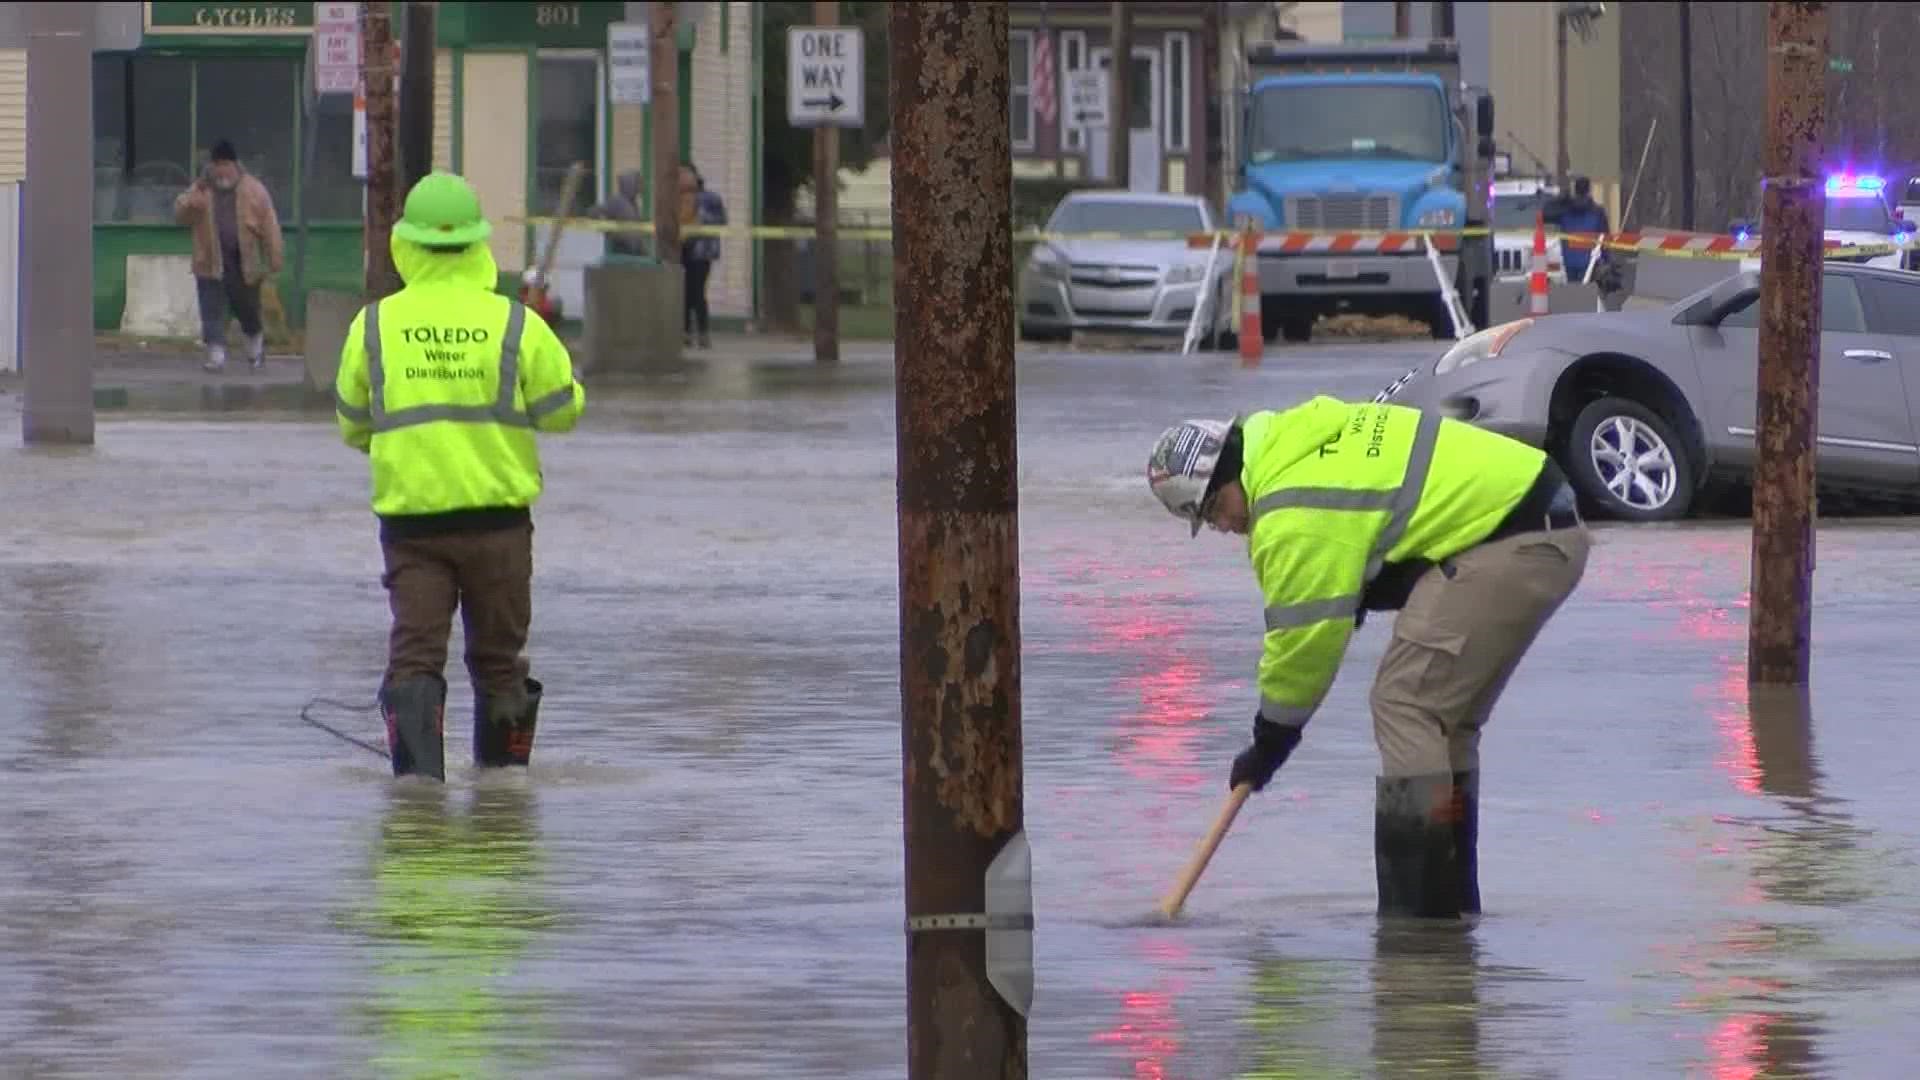 The message from city of Toledo officials after Monday's water main break at Galena and Chase streets, and legal advice on what to do next.